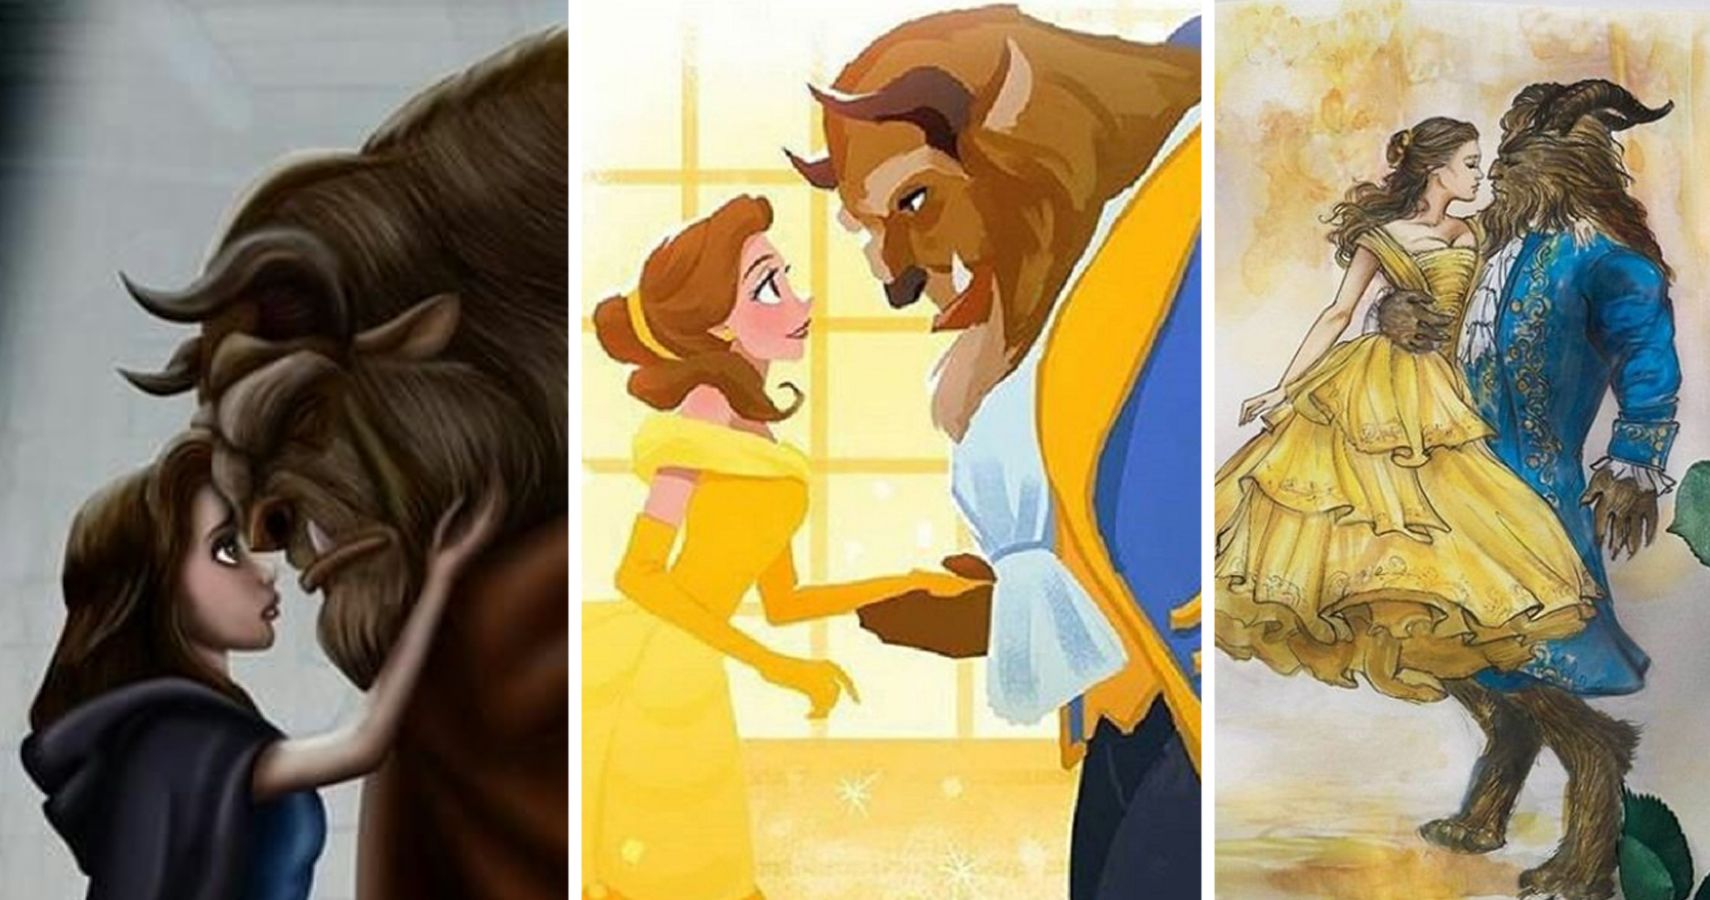 9 Beauty And The Beast Fan Pictures That Show He’s Not A Monster